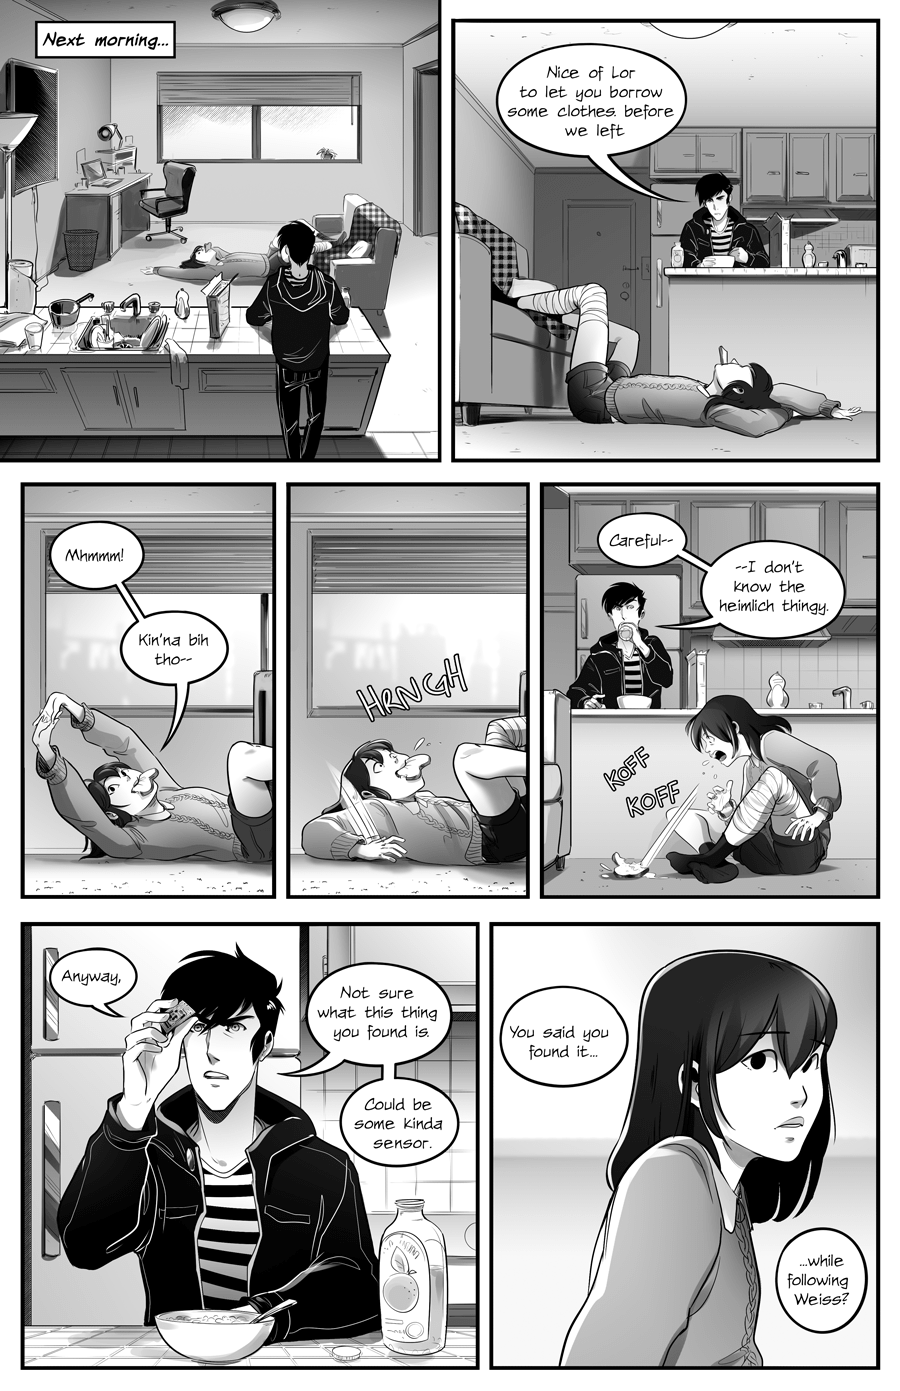 centralia 2050 page 20 chapter 5